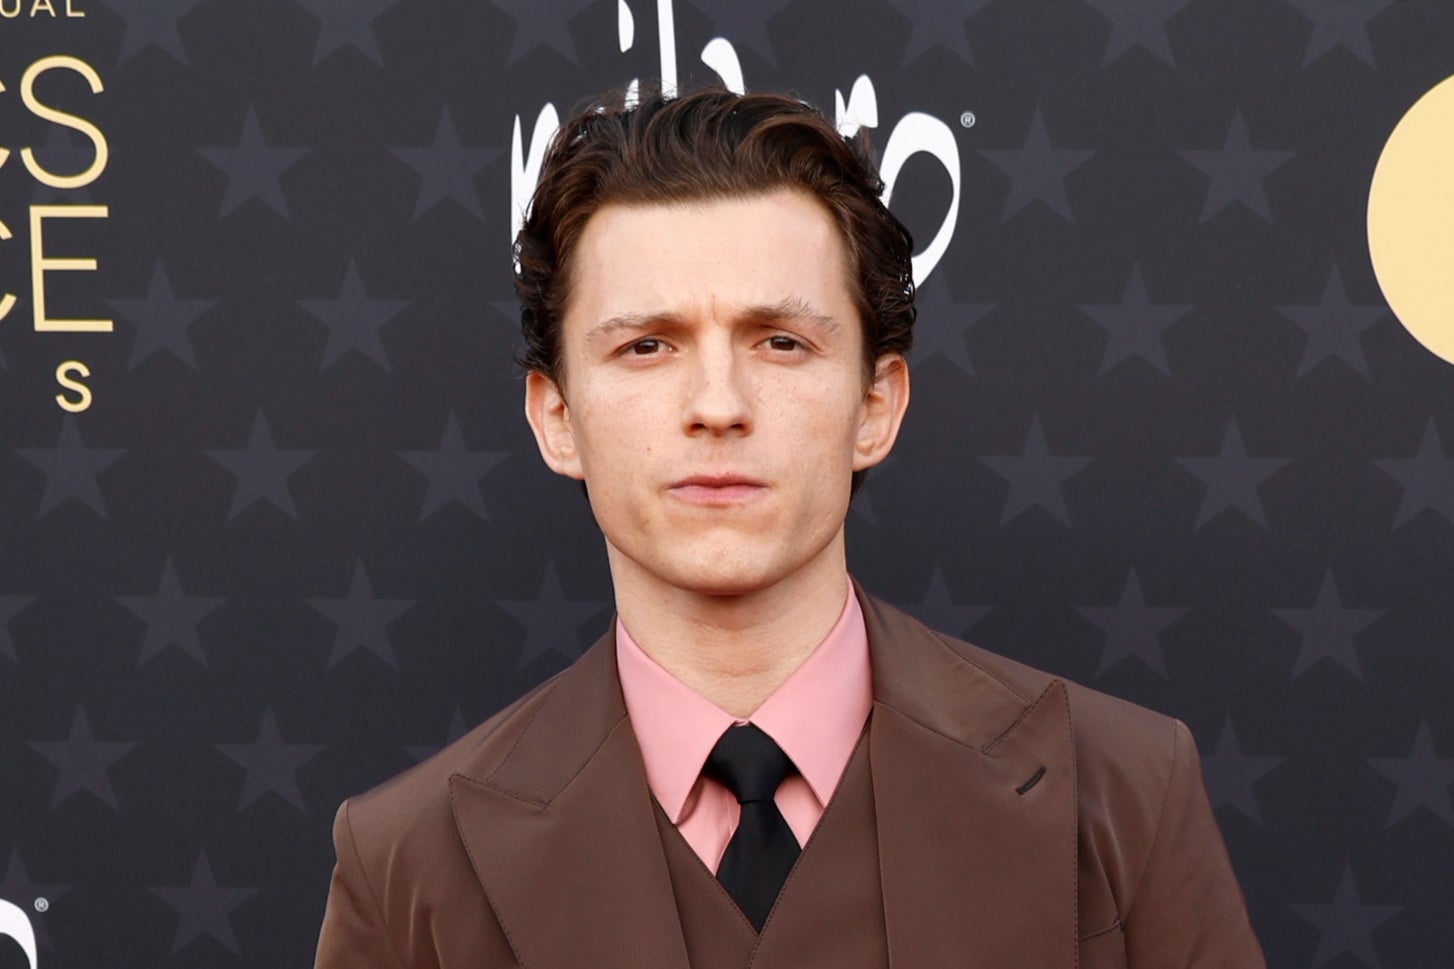 Wherefore art thou, Spider-Man? Tom Holland to star in new Romeo and Juliet production